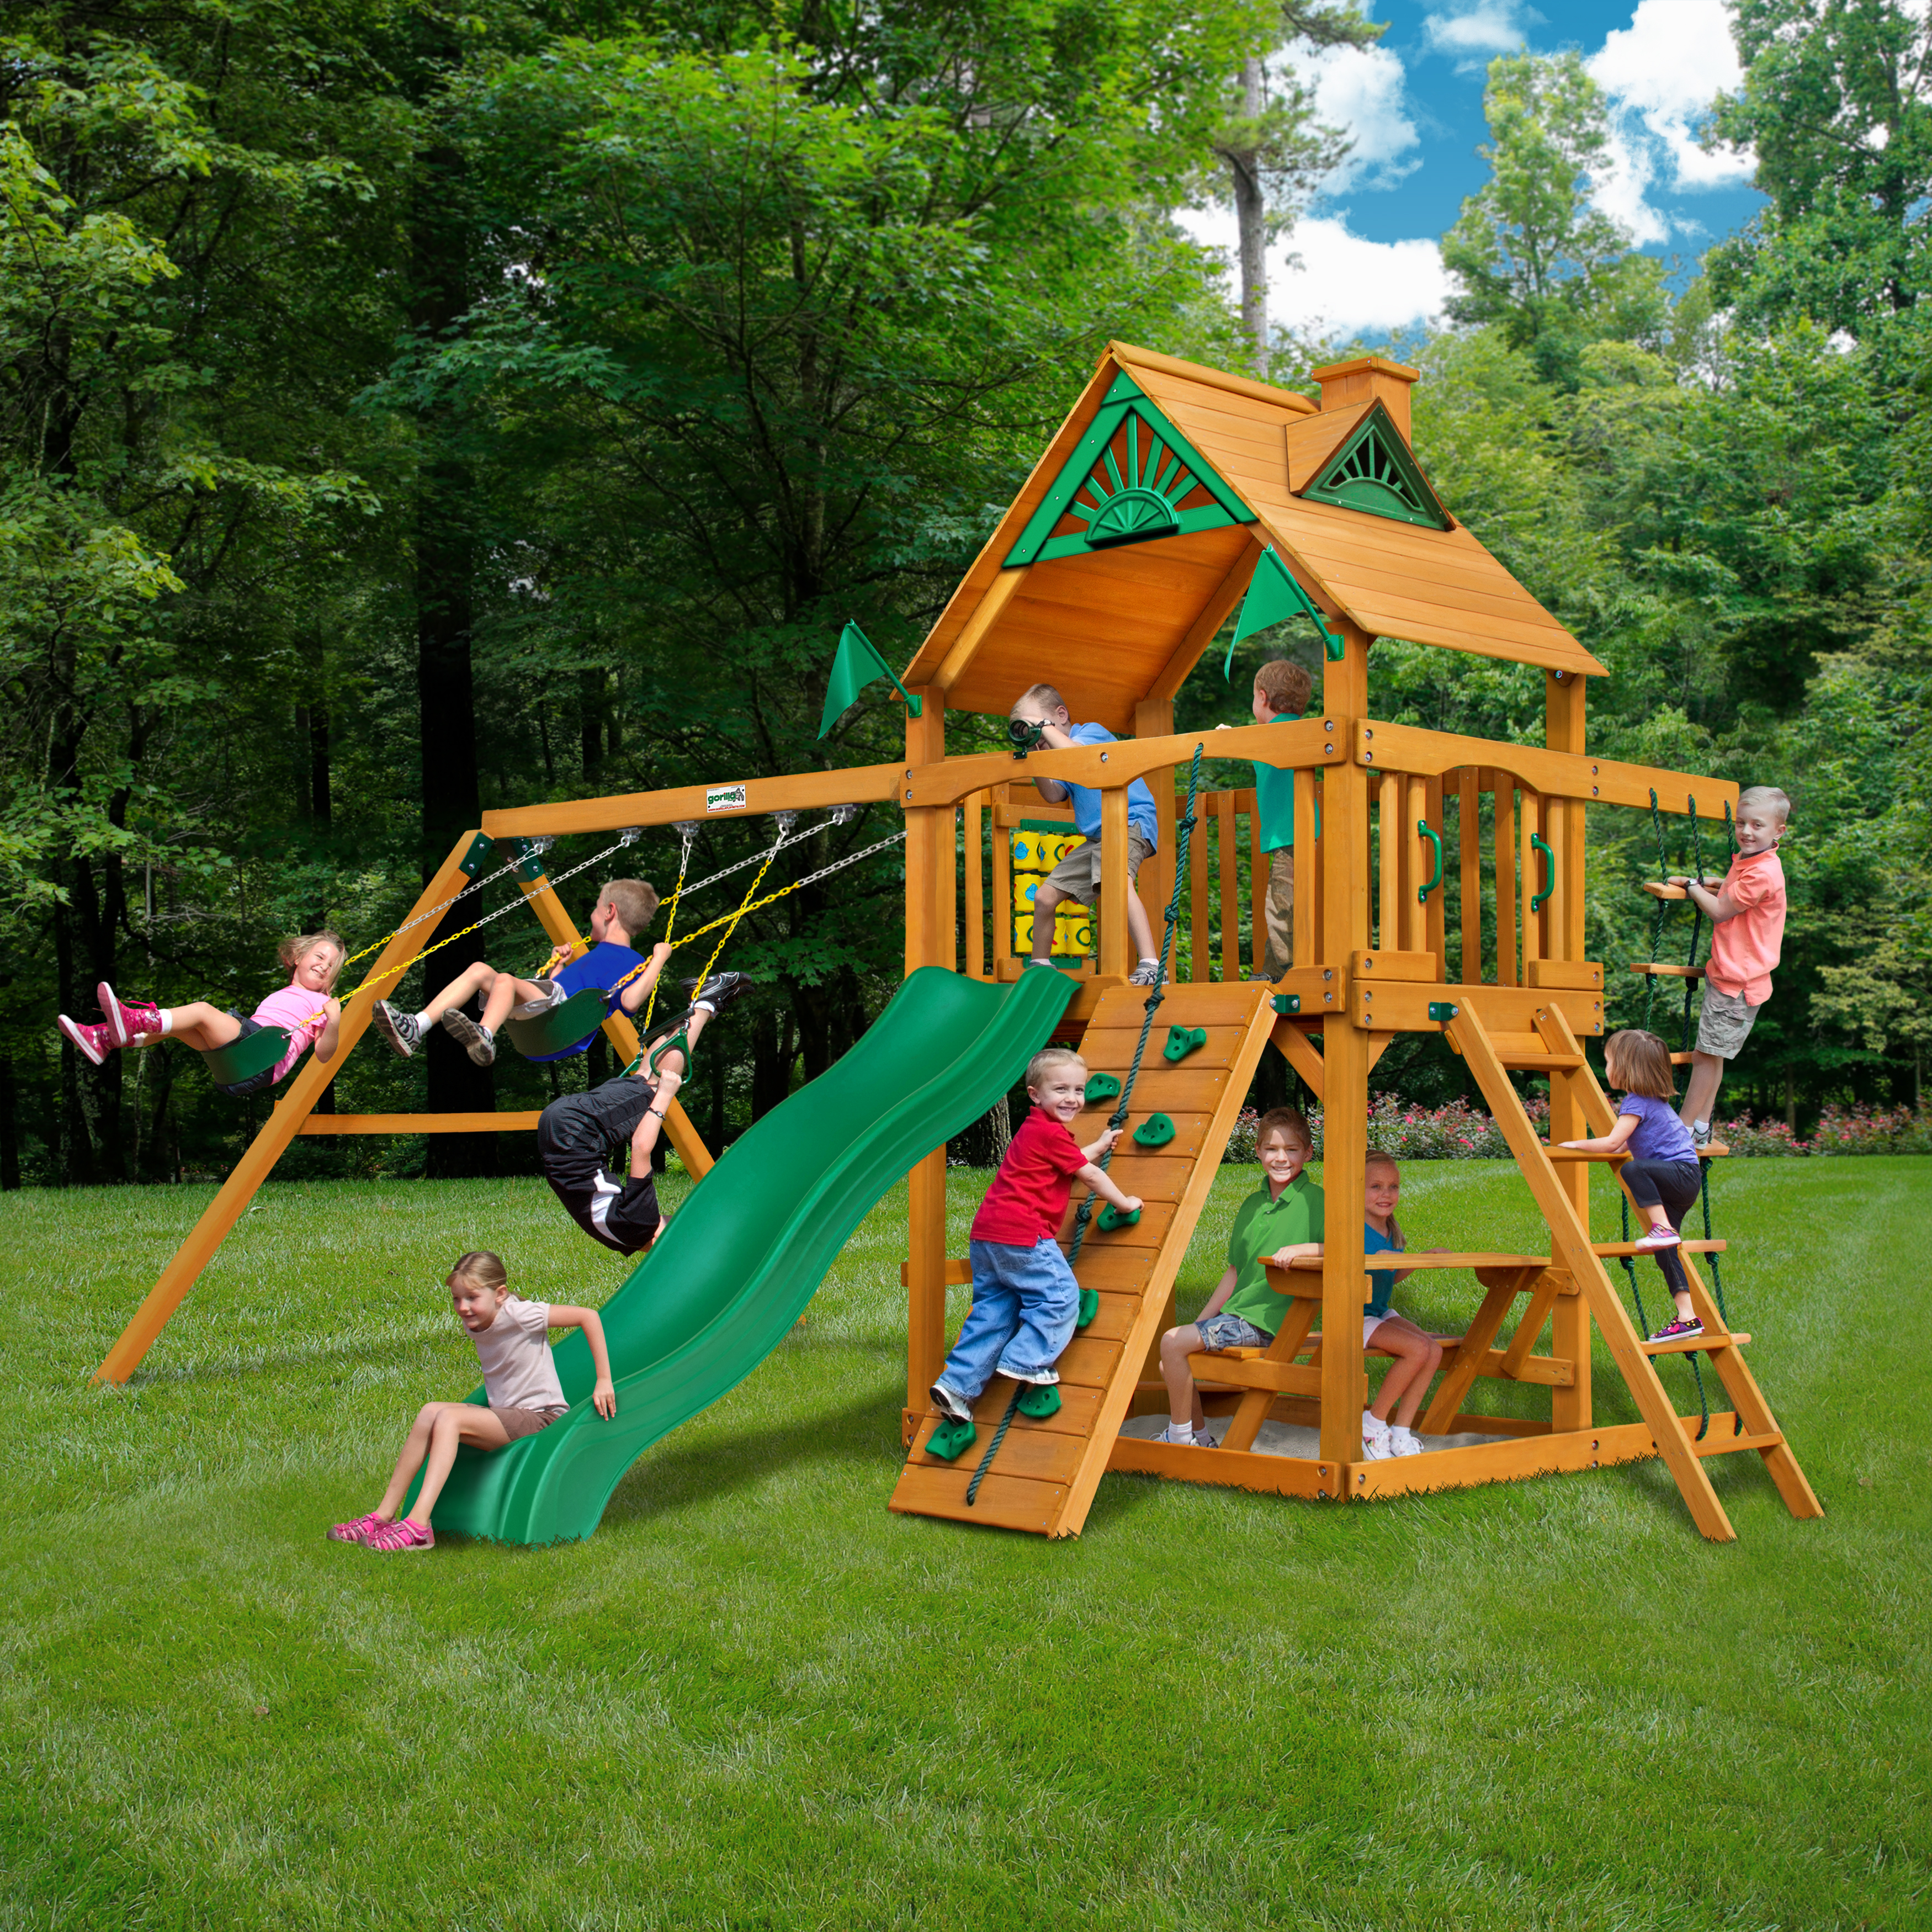 Gorilla Playsets Chateau Cedar Swing Set with Natural Cedar Posts - image 3 of 15